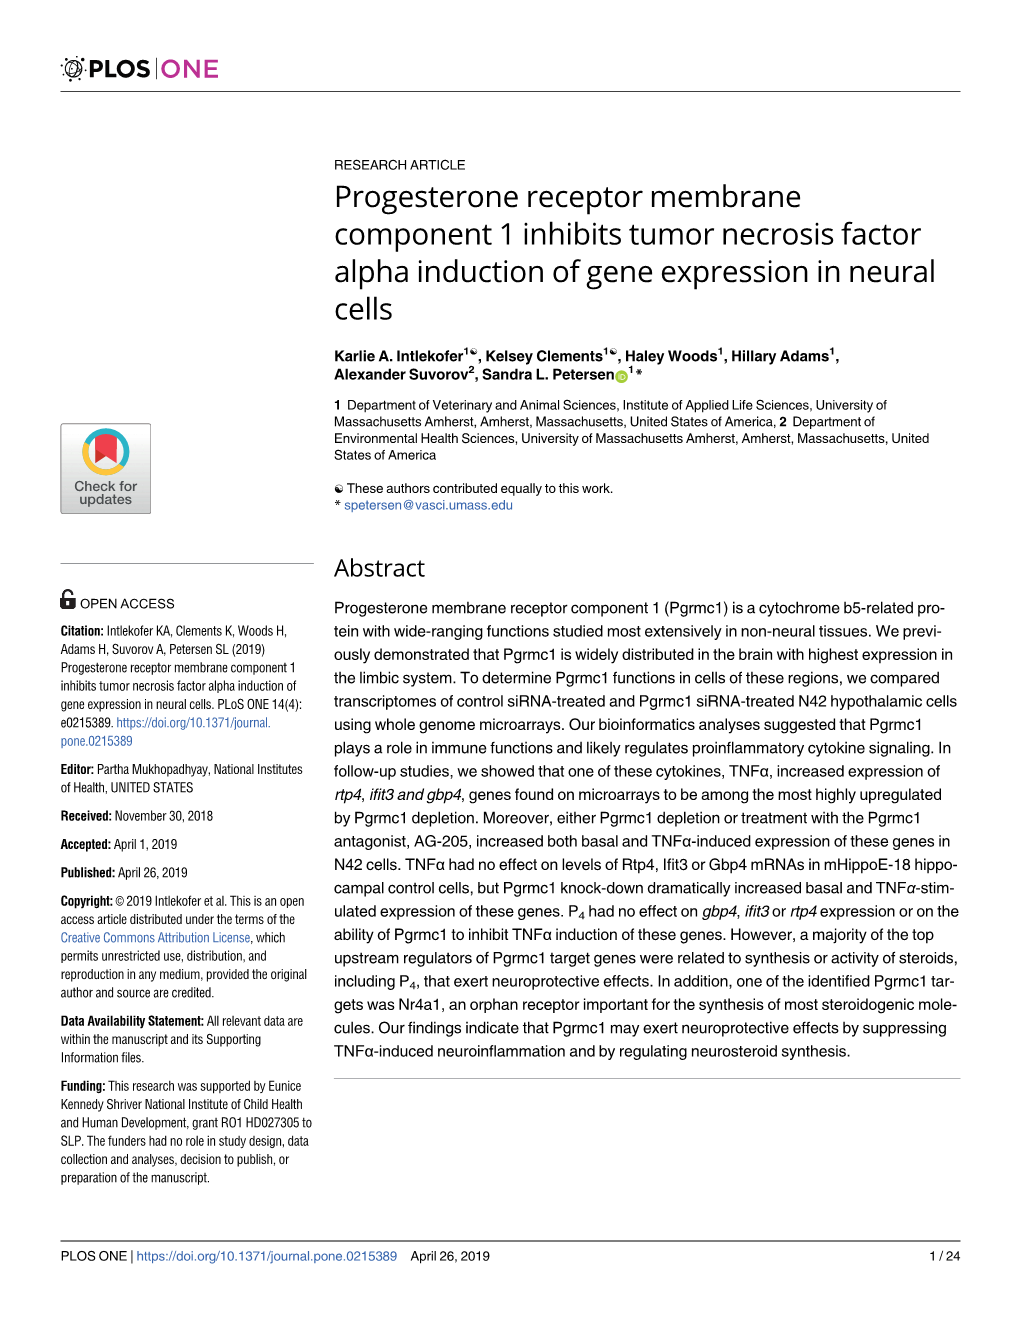 Progesterone Receptor Membrane Component 1 Inhibits Tumor Necrosis Factor Alpha Induction of Gene Expression in Neural Cells